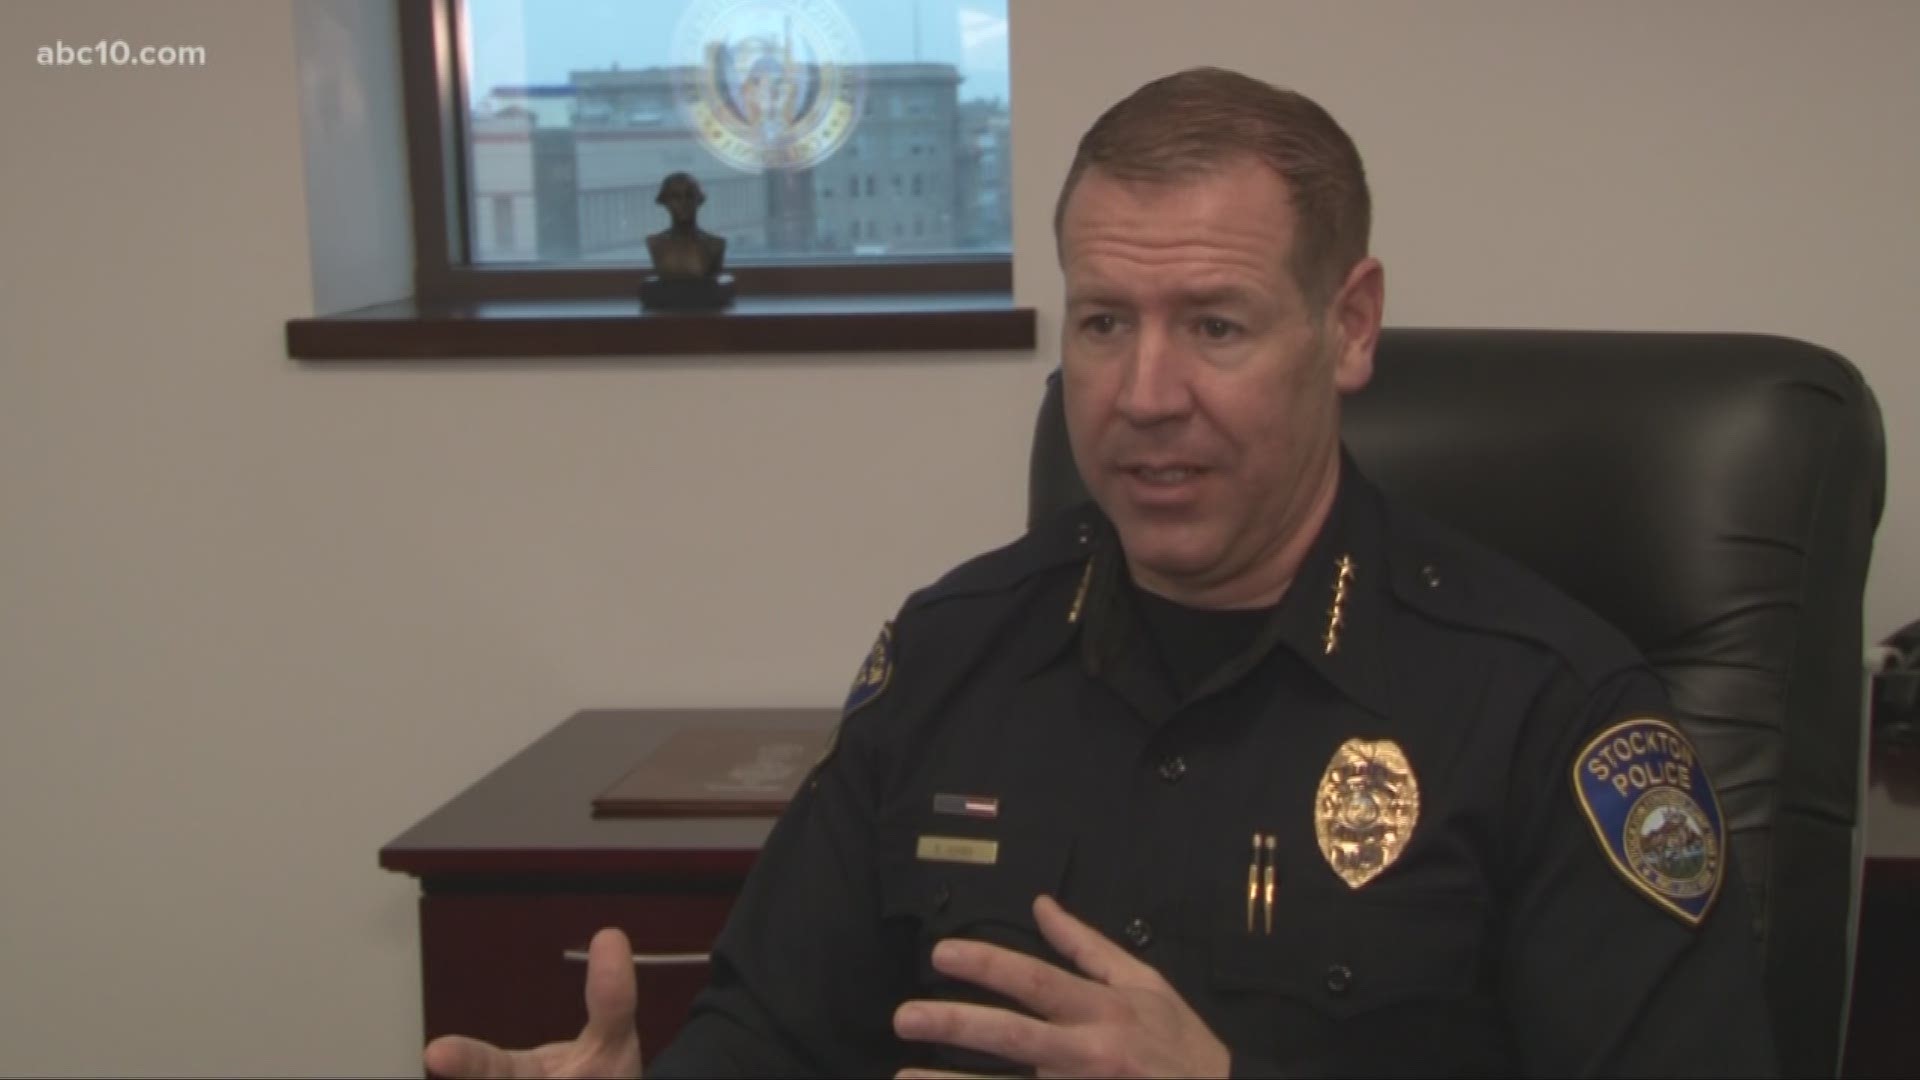 Stockton Police Chief Eric Jones says a big reason for the downward trend is community involvement. He says the department has given the community "tools" they can use to help curb the violence.